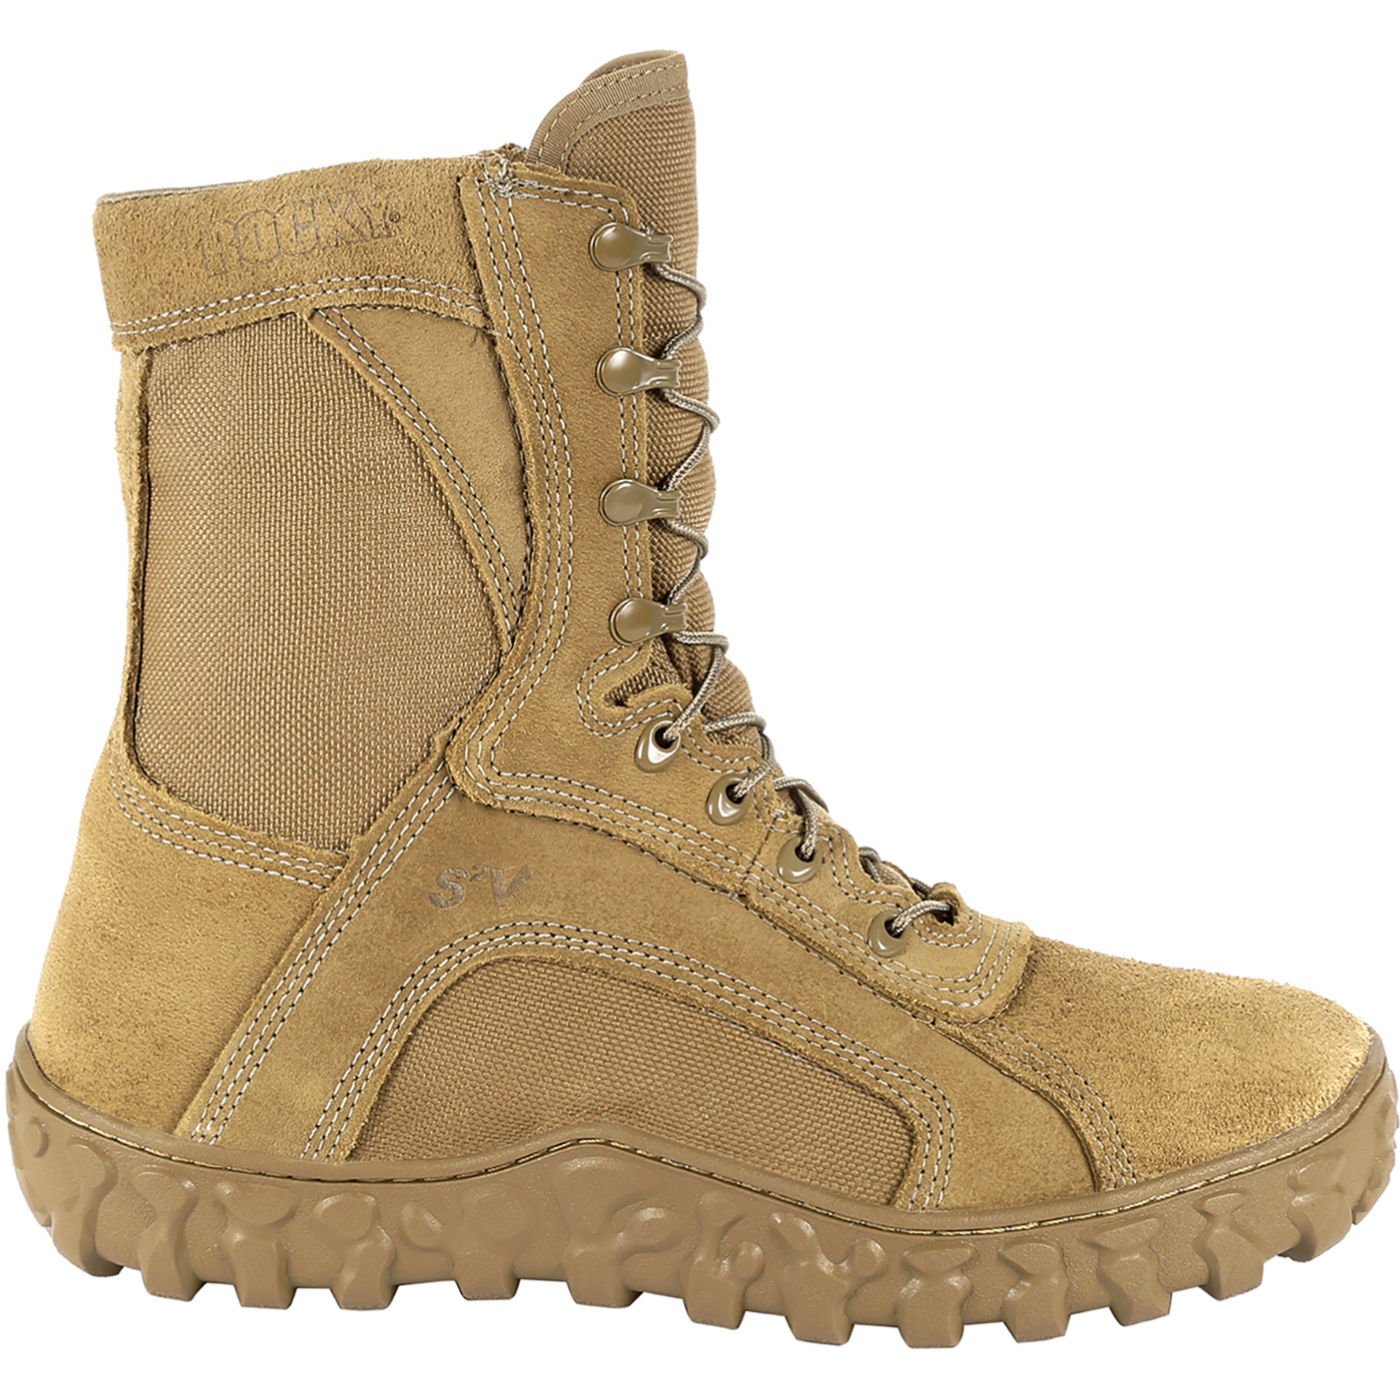 Rocky S2V: Composite Toe Waterproof Insulated Military Boot, RKC097